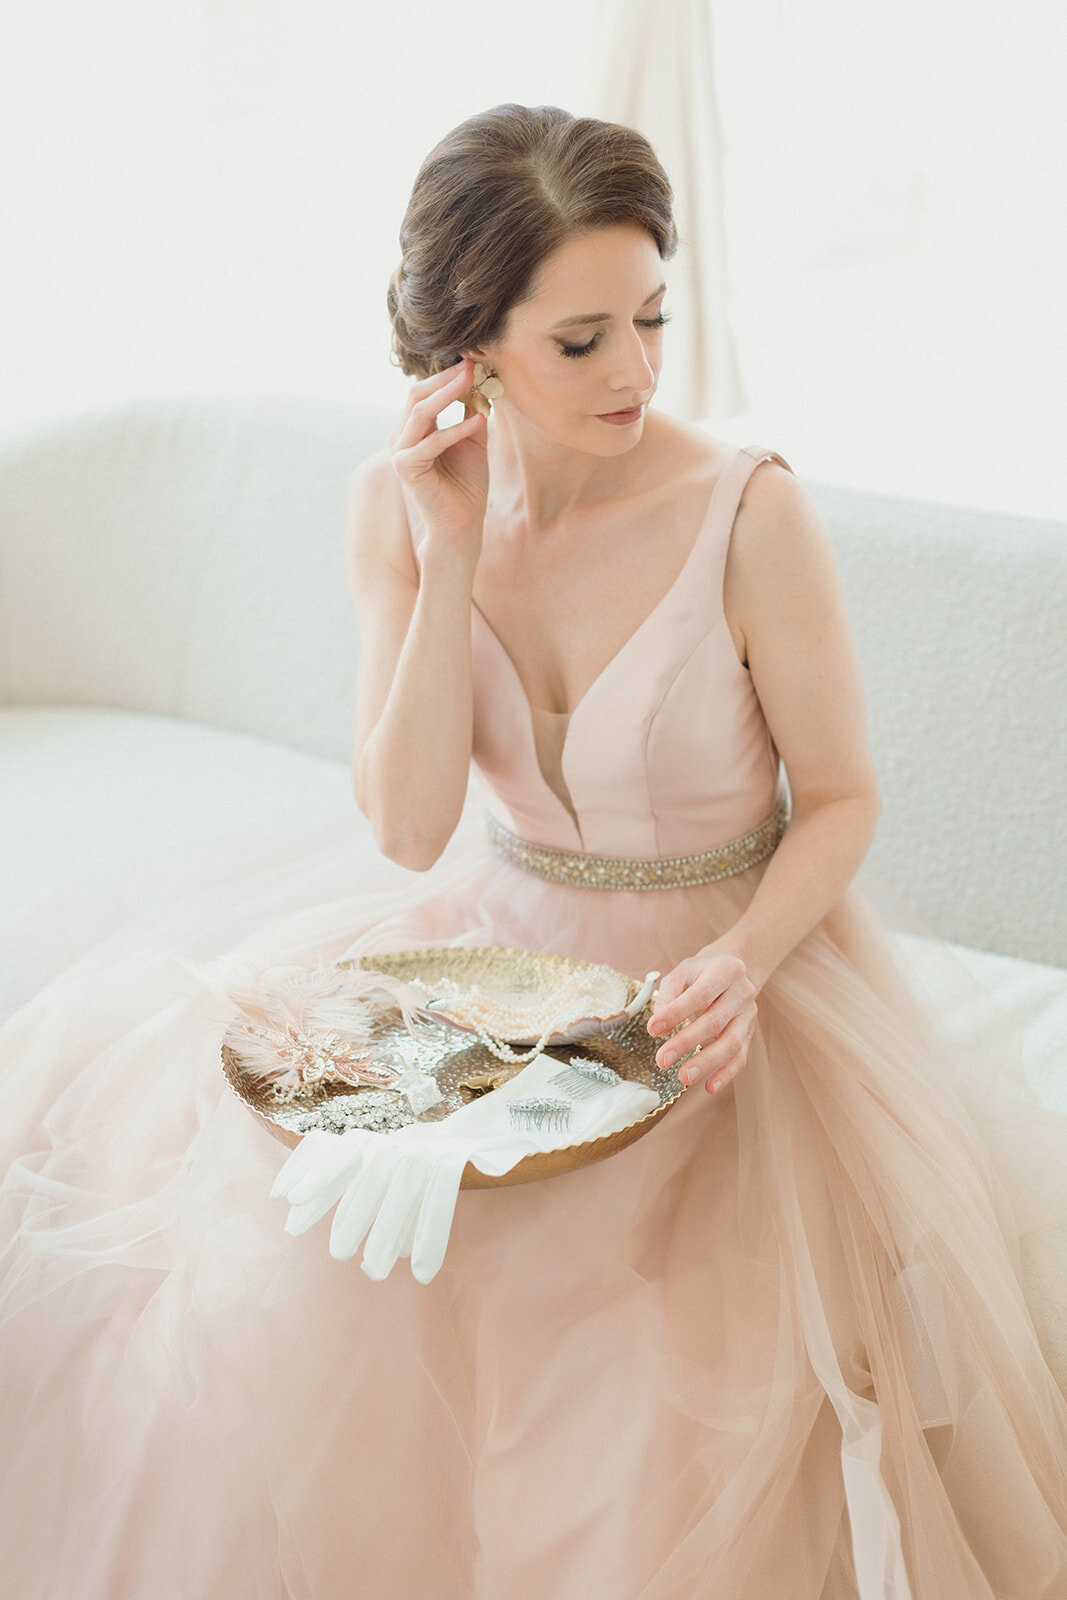 light skinned woman in pink ballgown is seated, with a tray of dressing items and jewelry, and holding one of the earrings to her ear..